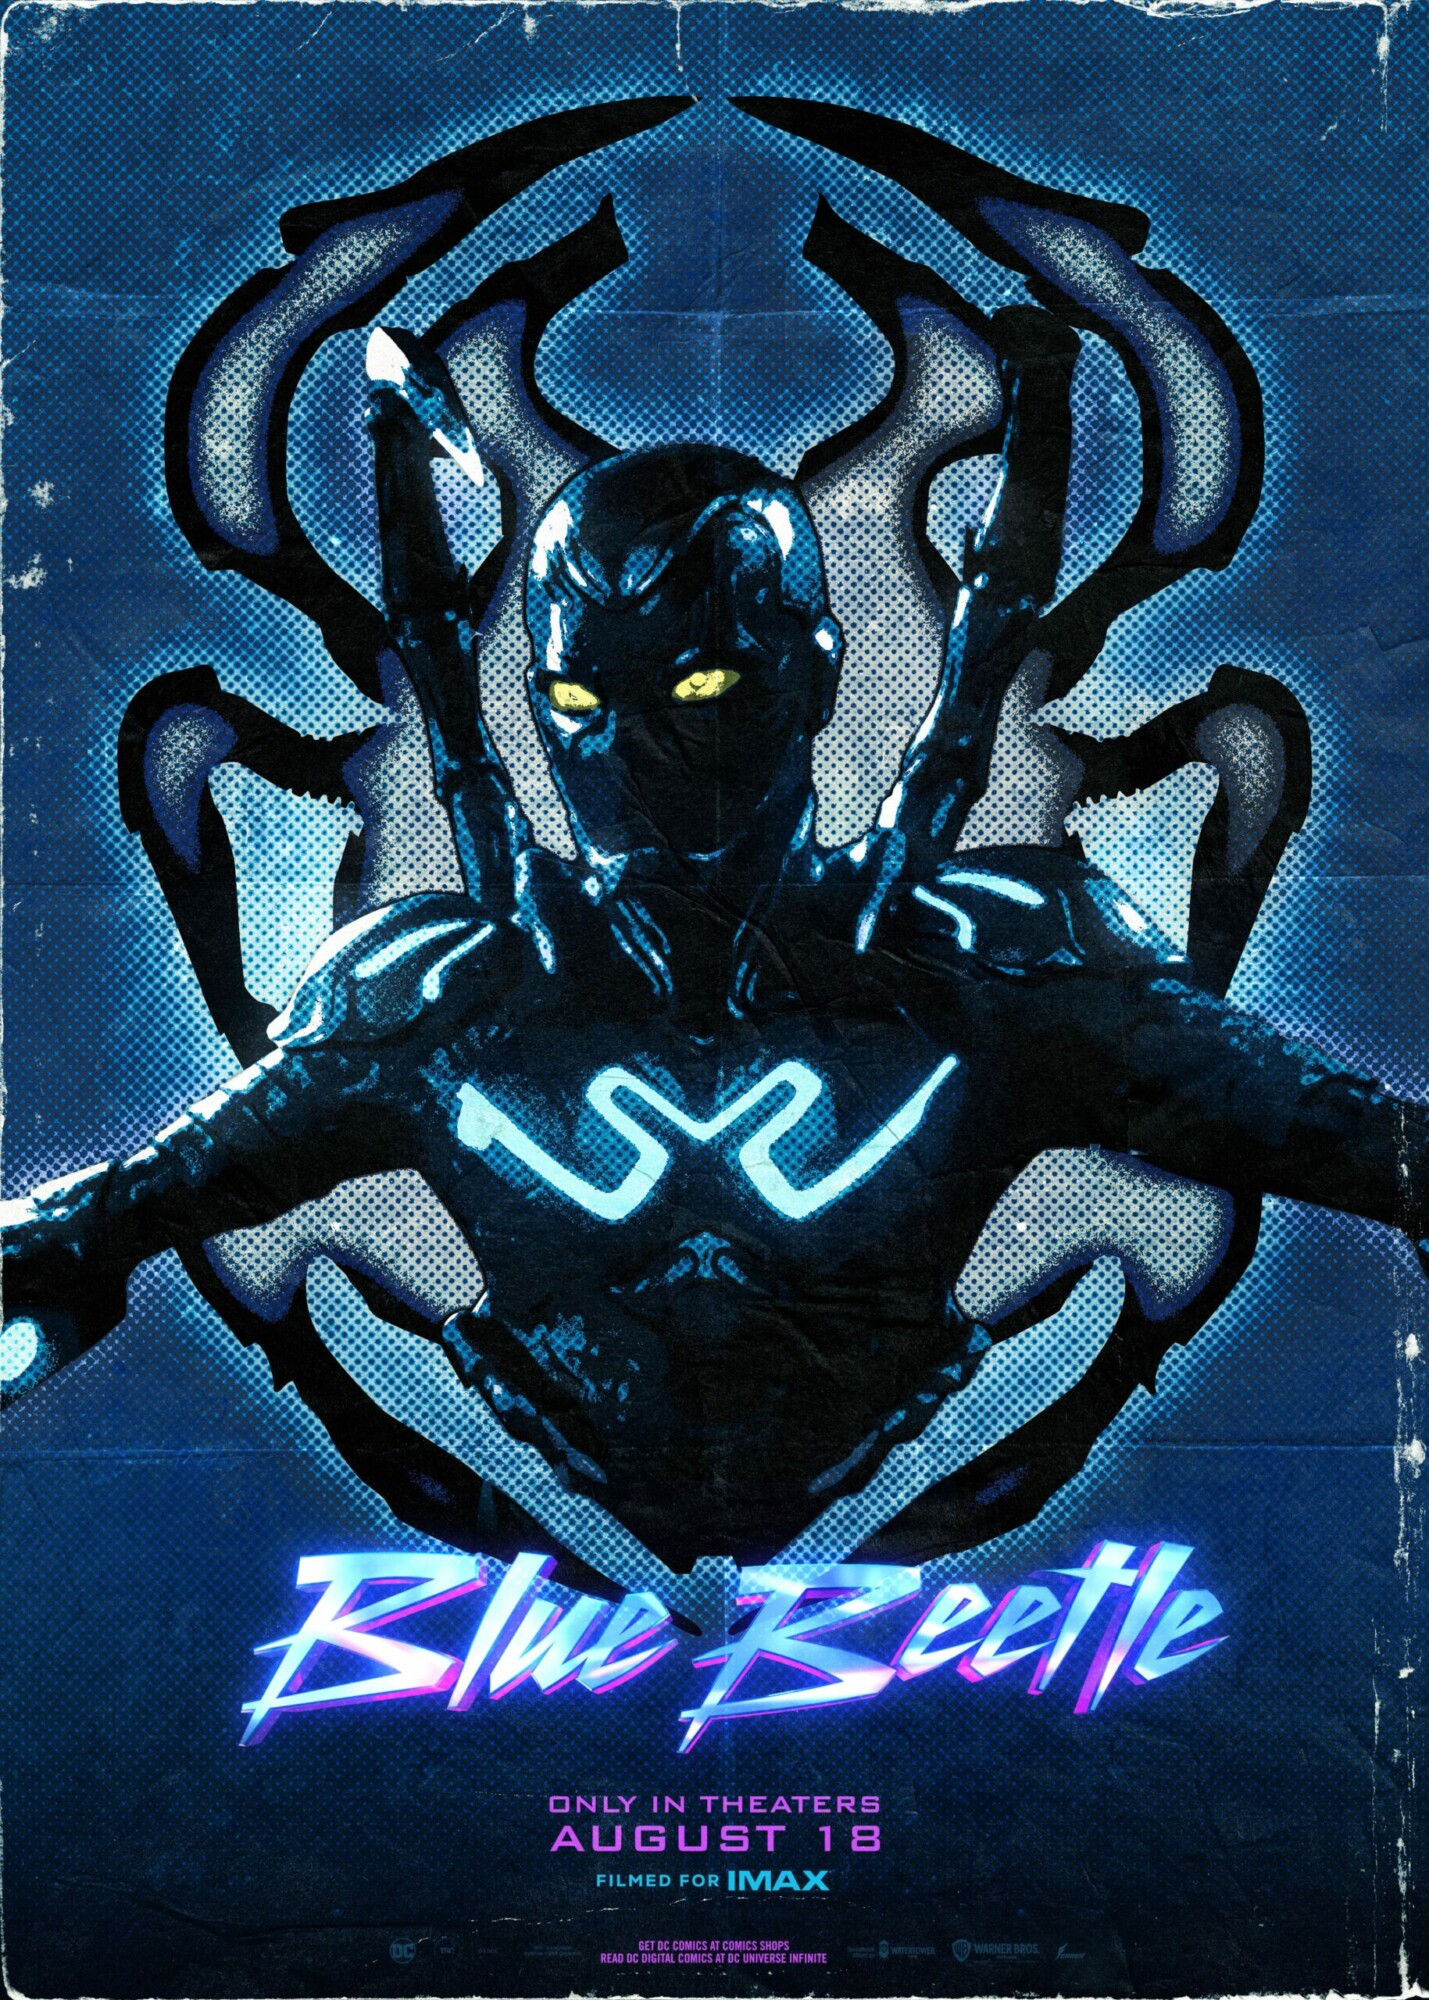 Where can I watch Blue Beetle in IMAX 1.90:1? : r/BlueBeetle